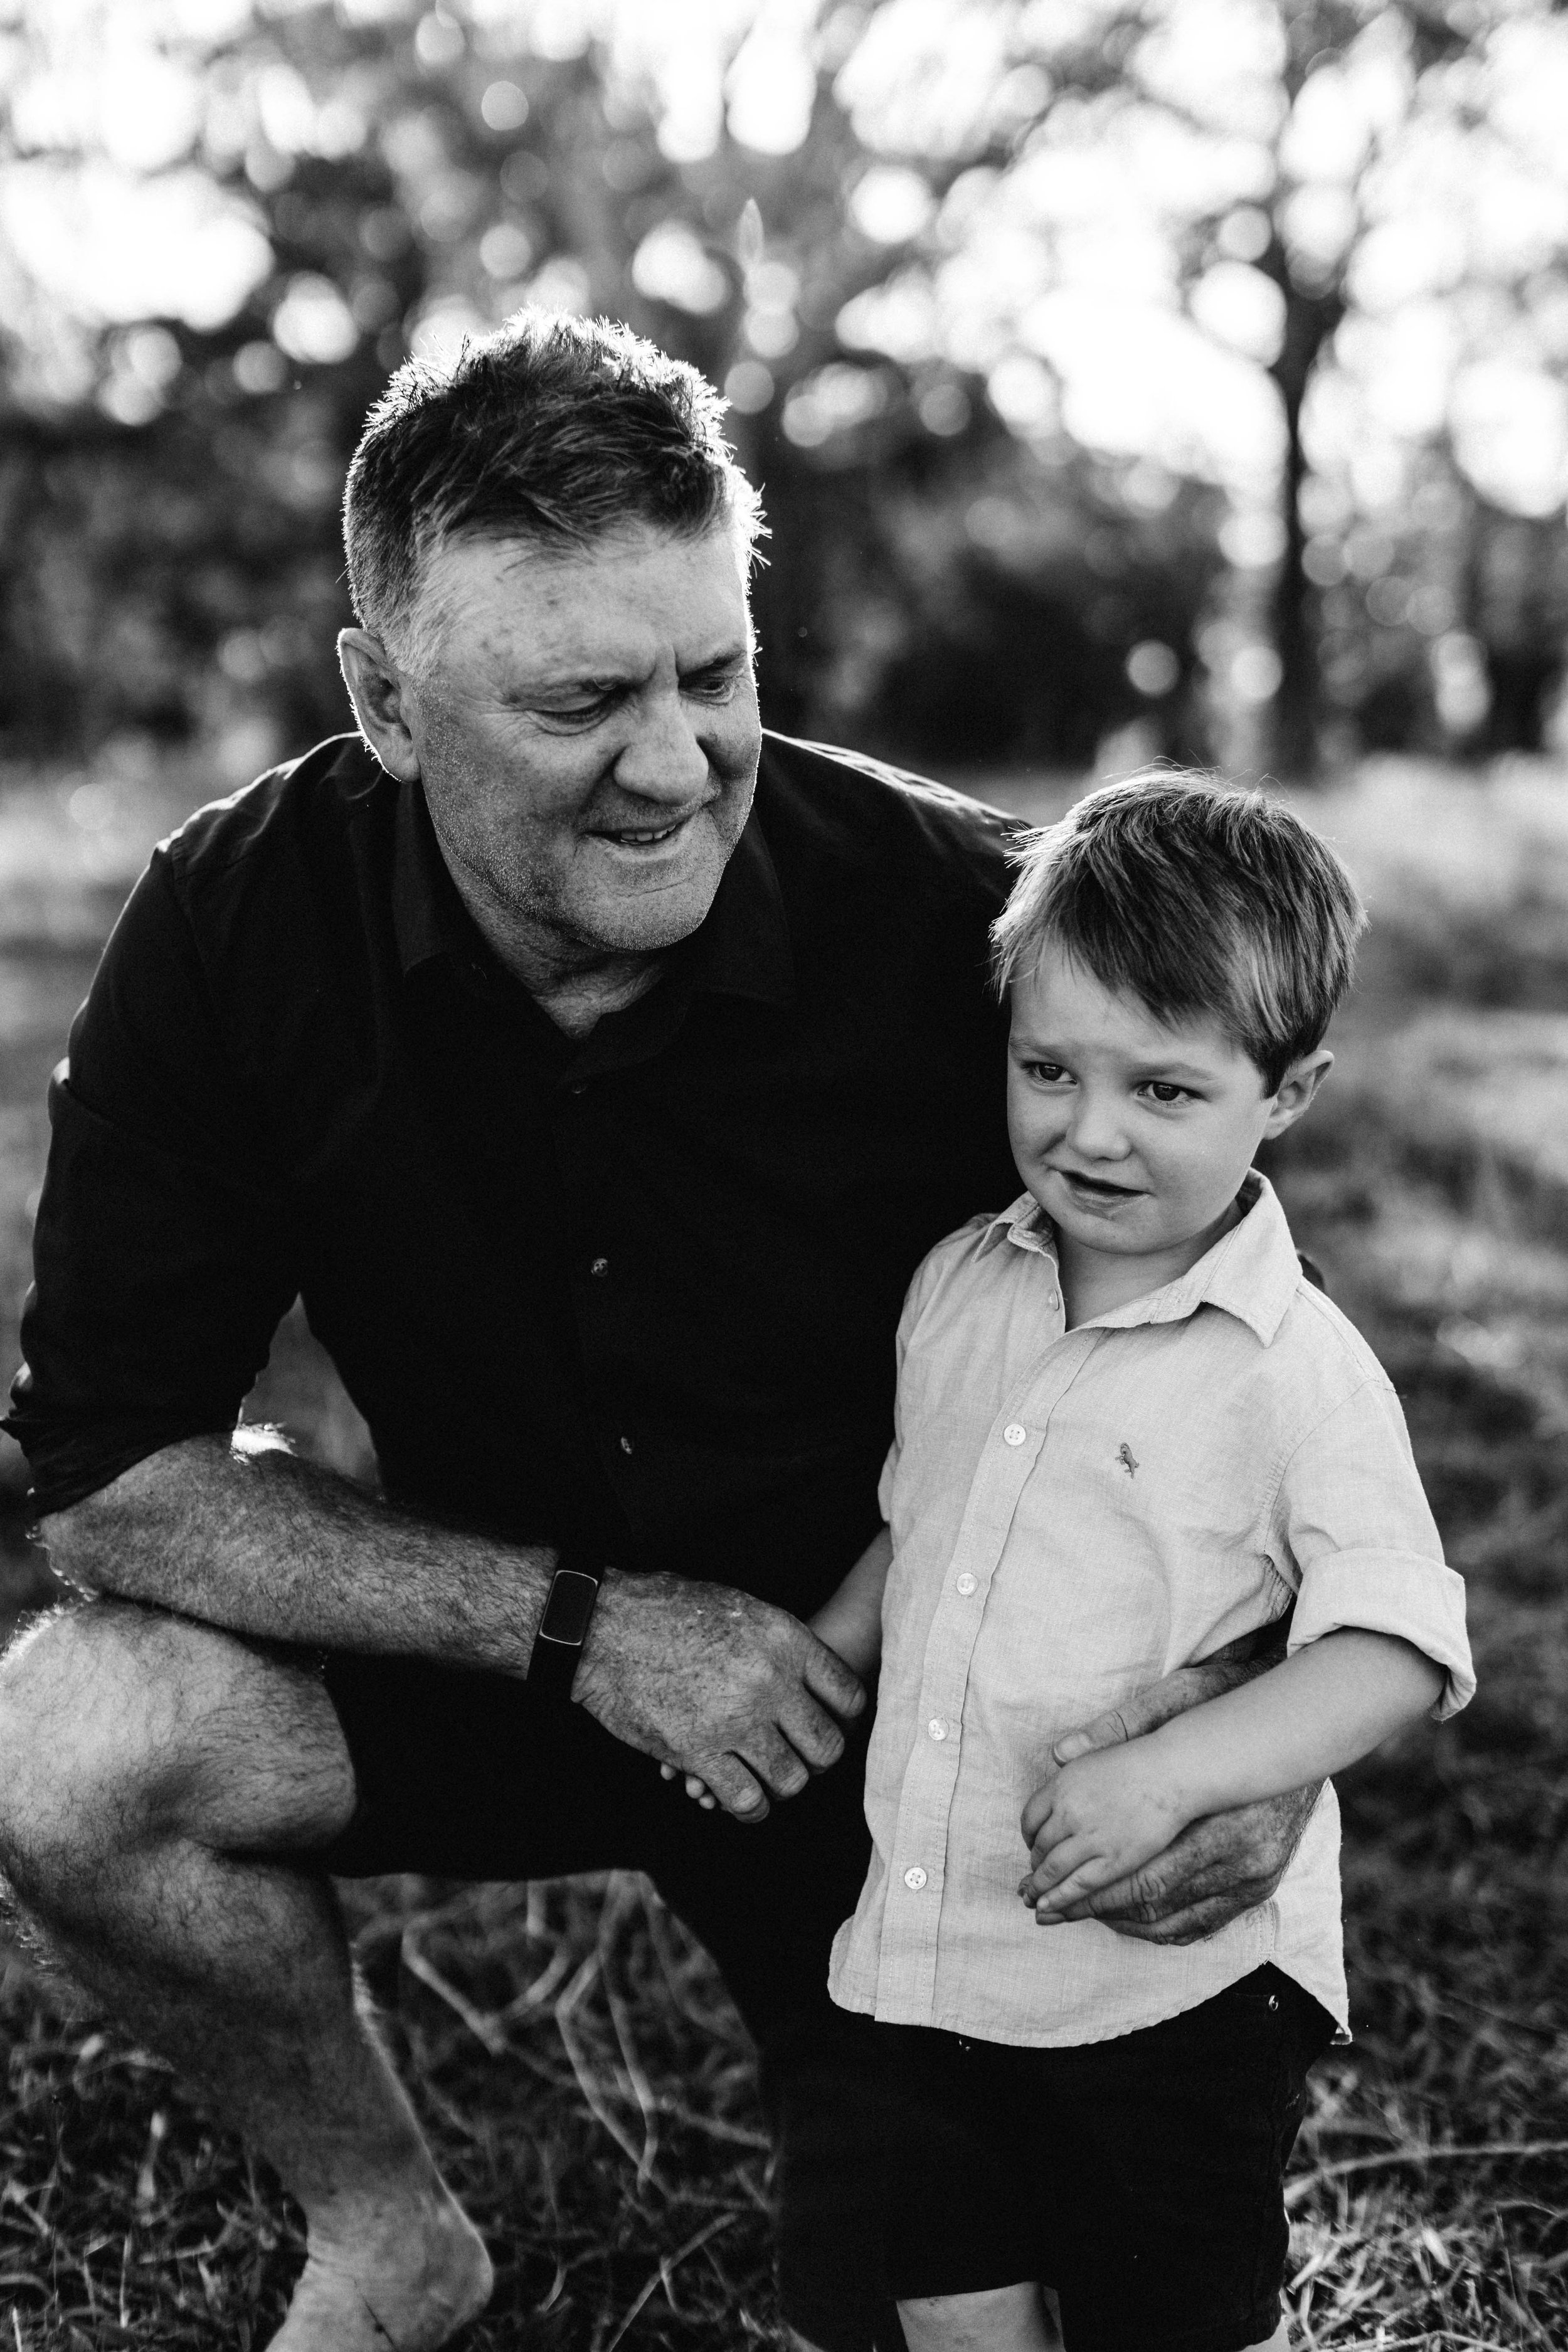 durney-family-exeter-southern-highlands-bowral-inhome-family-lifestyle-wollondilly-camden-macarthur-sydney-photography-www.emilyobrienphotography.net-33.jpg